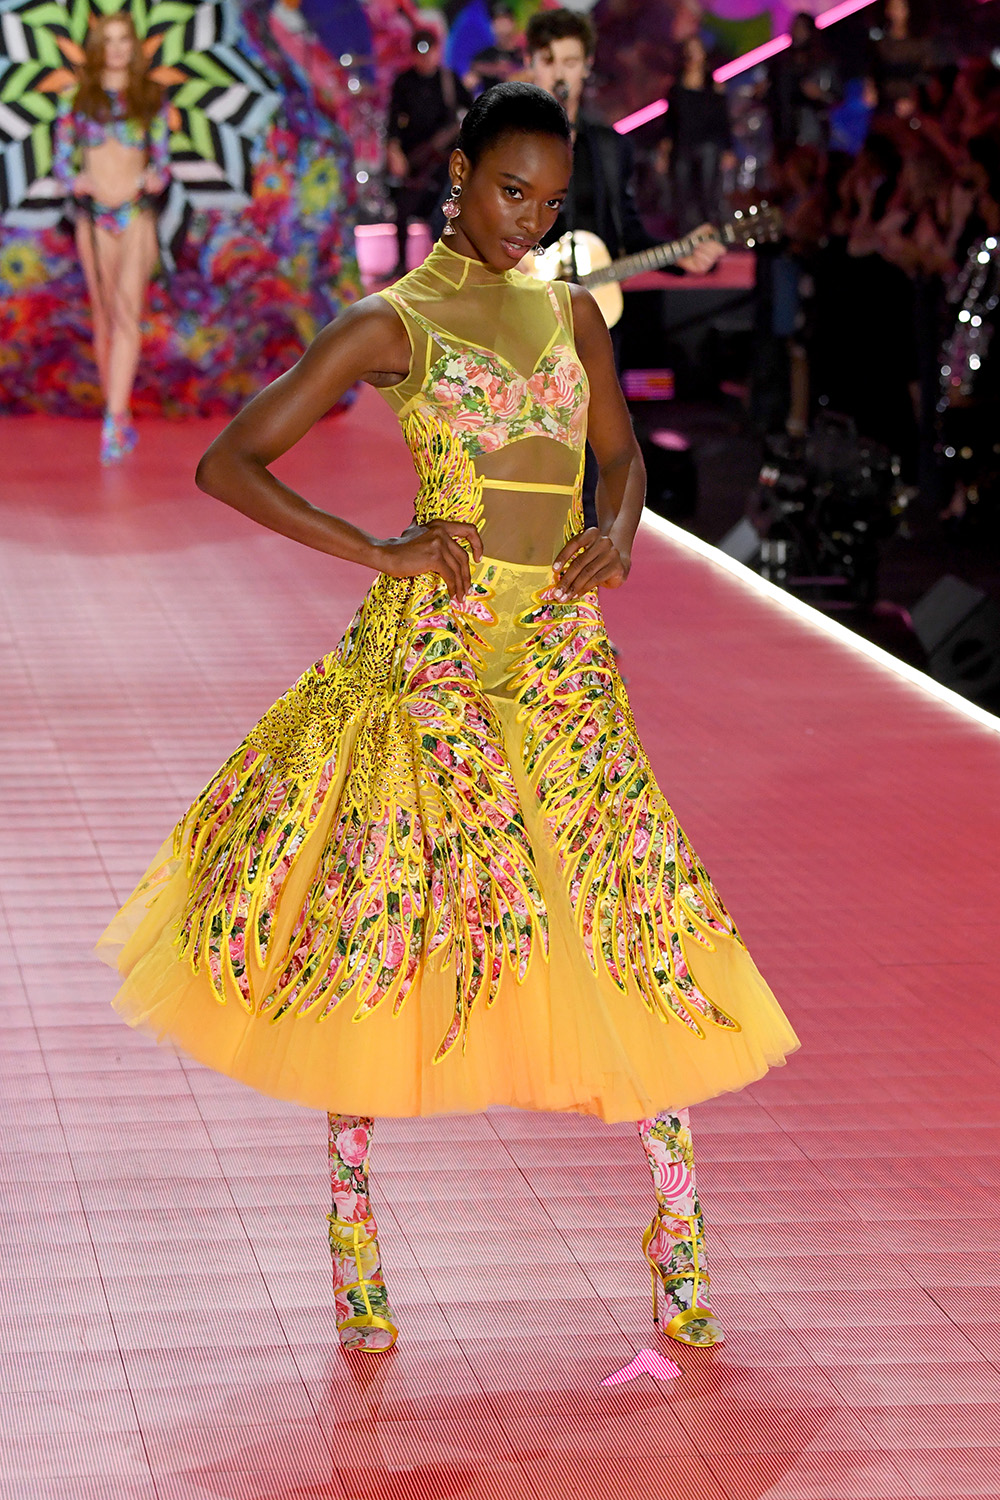 NEW YORK, NY - NOVEMBER 08: Mayowa Nicholas walks the runway while Shawn Mendes performs during the 2018 Victoria's Secret Fashion Show at Pier 94 on November 8, 2018 in New York City. (Photo by Kevin Mazur/WireImage)